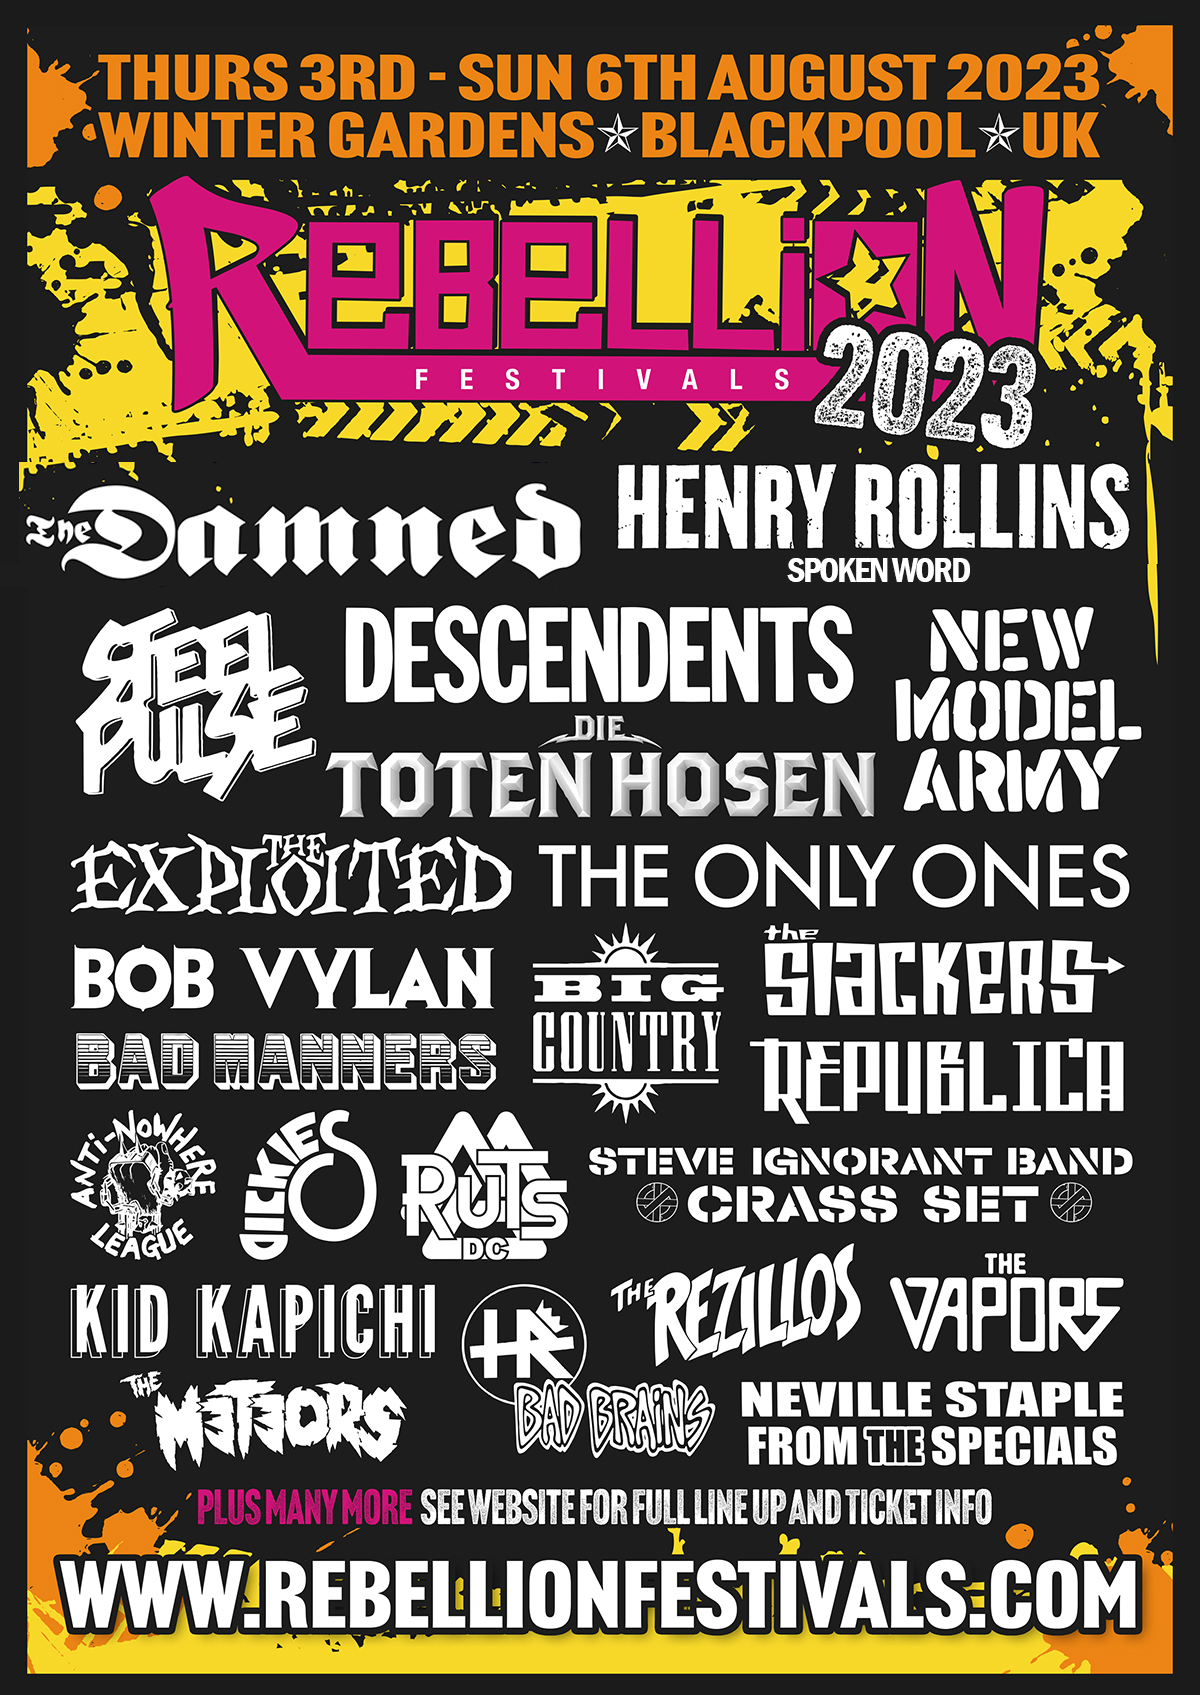 THE REBELLION FESTIVAL 2023 is gearing up to thousands of fans